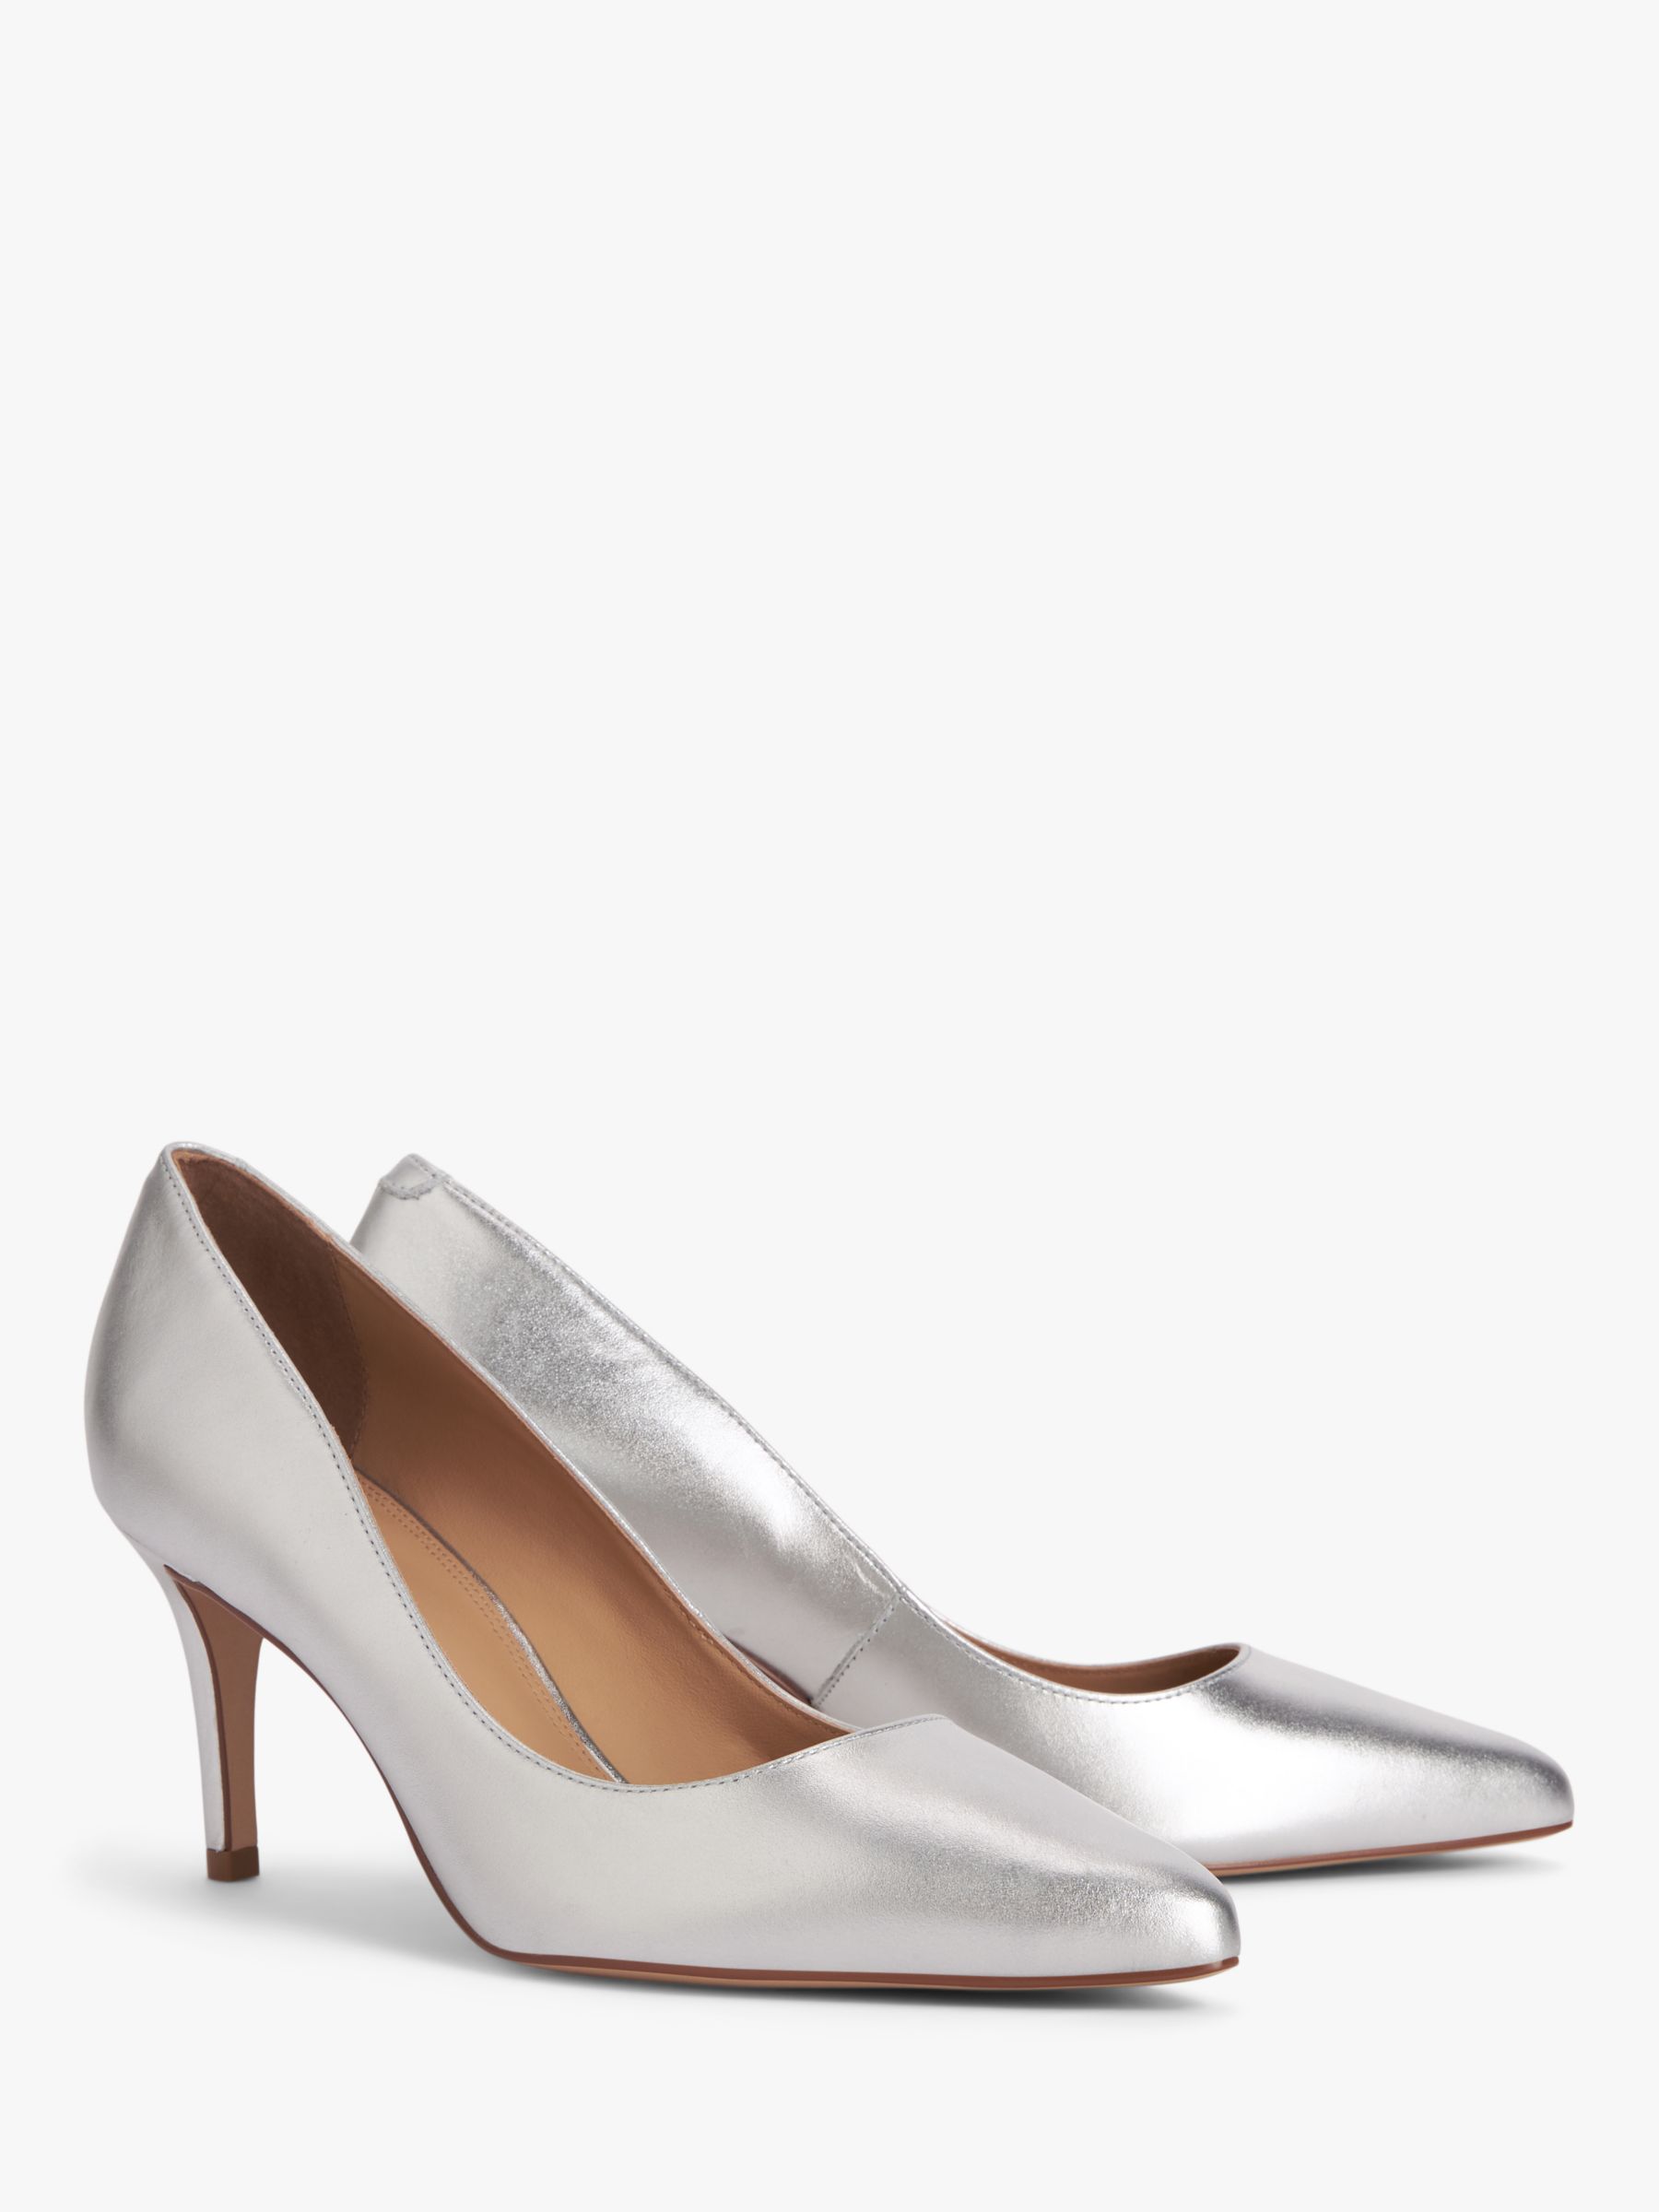 John Lewis Blessing Leather Stiletto Heel Pointed Toe Court Shoes